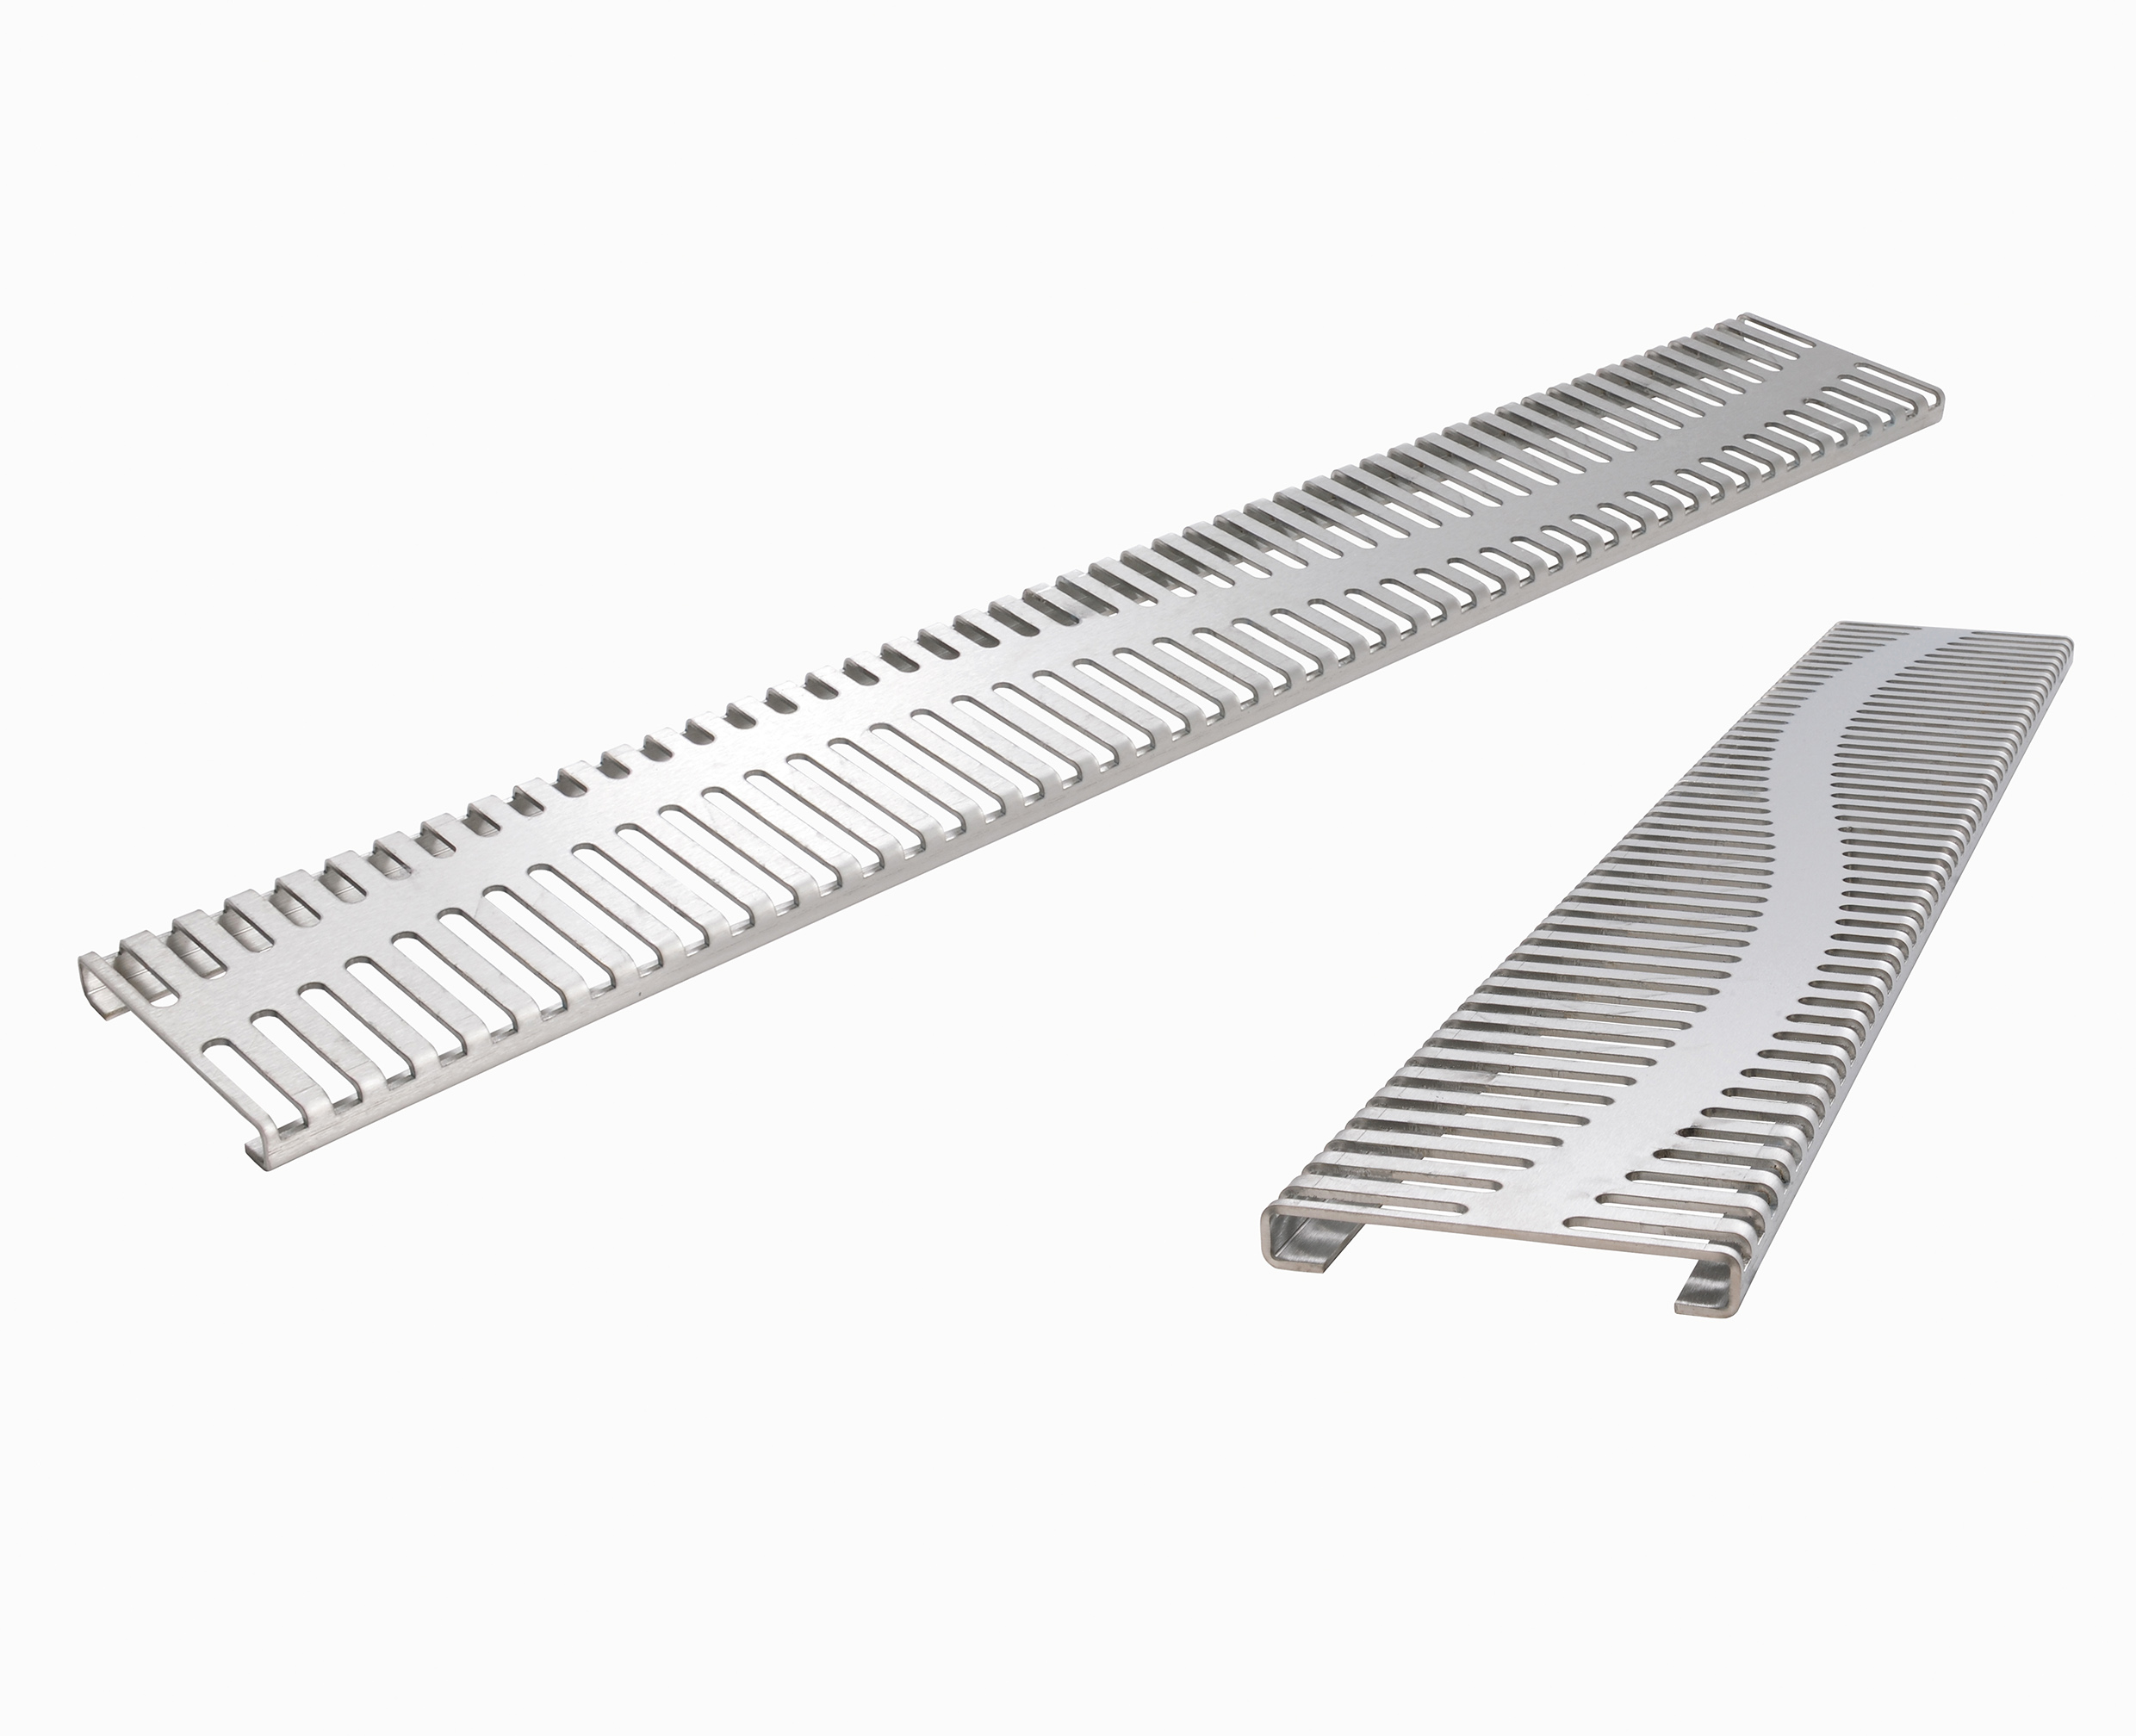 Strikingly unique: the stainless steel Rivo designer grating features slot-like perforations visually broken up by a wavy line running through them.